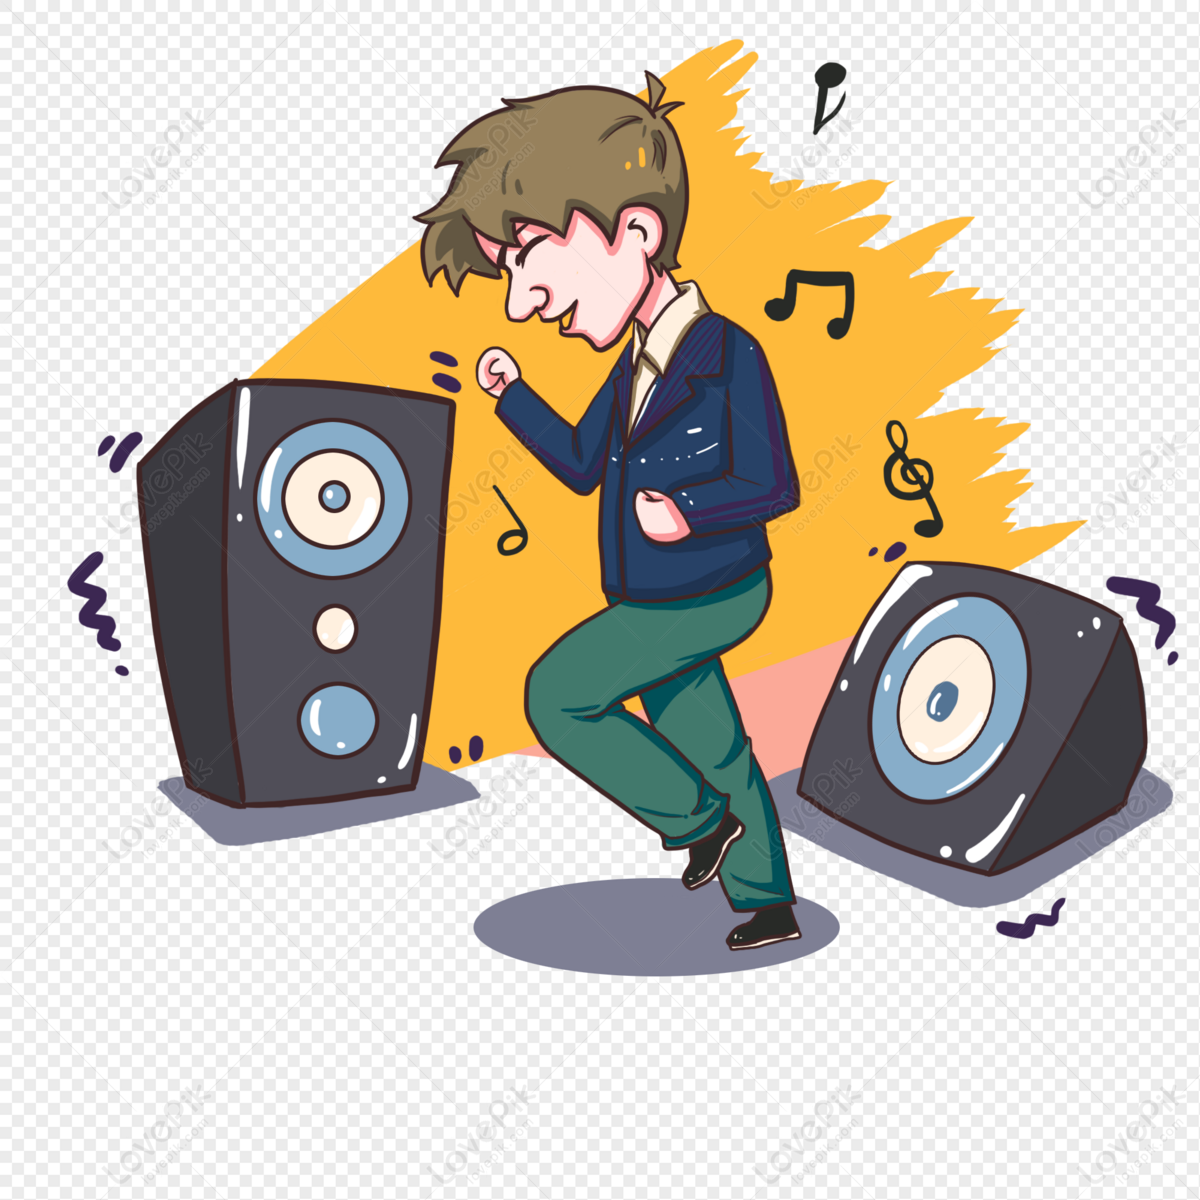 Music Performance Free PNG And Clipart Image For Free Download - Lovepik |  401724569